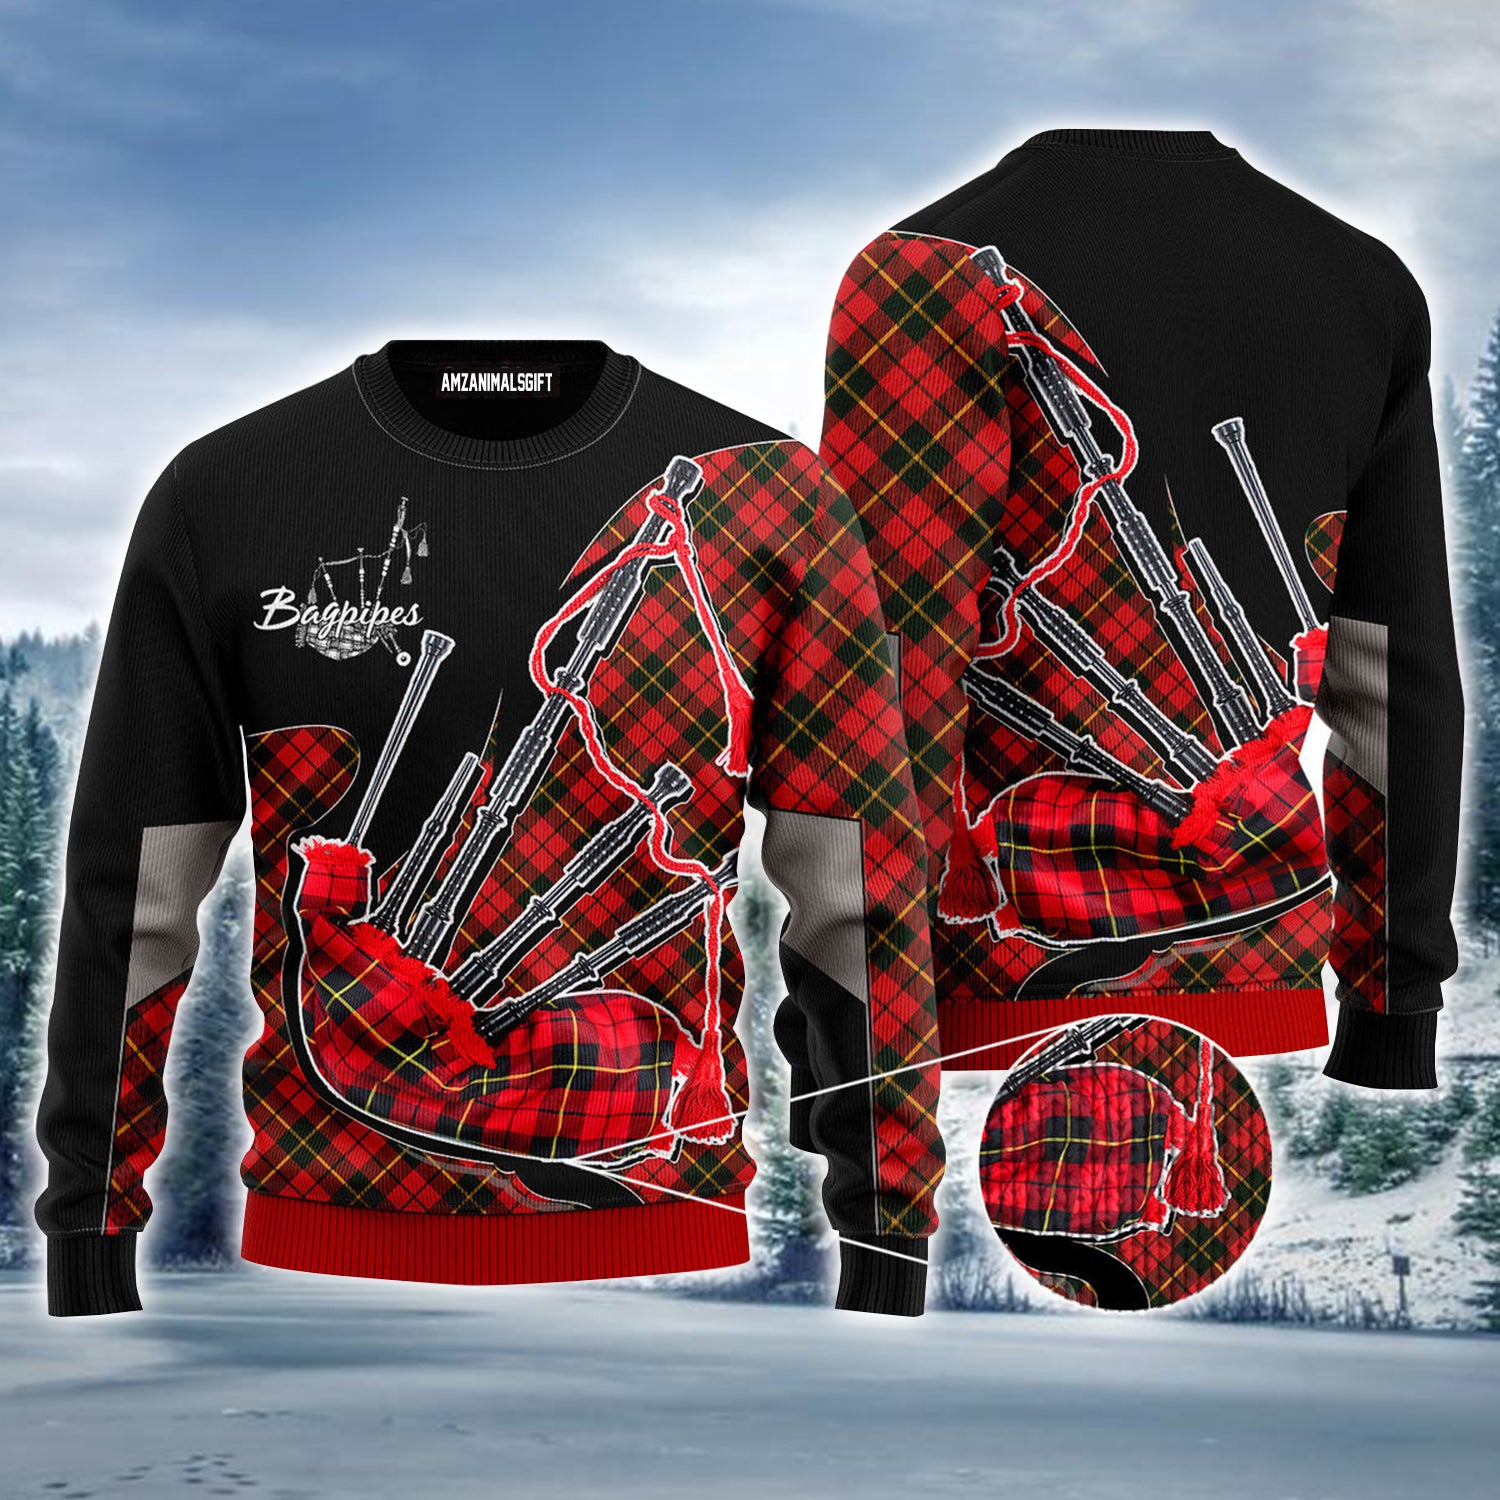 Bagpipes Music Ugly Sweater, Christmas Ugly Sweater, Red & Black Plaid Pattern Ugly Sweater For Men & Women - Perfect Gift For Music Lovers, Christmas